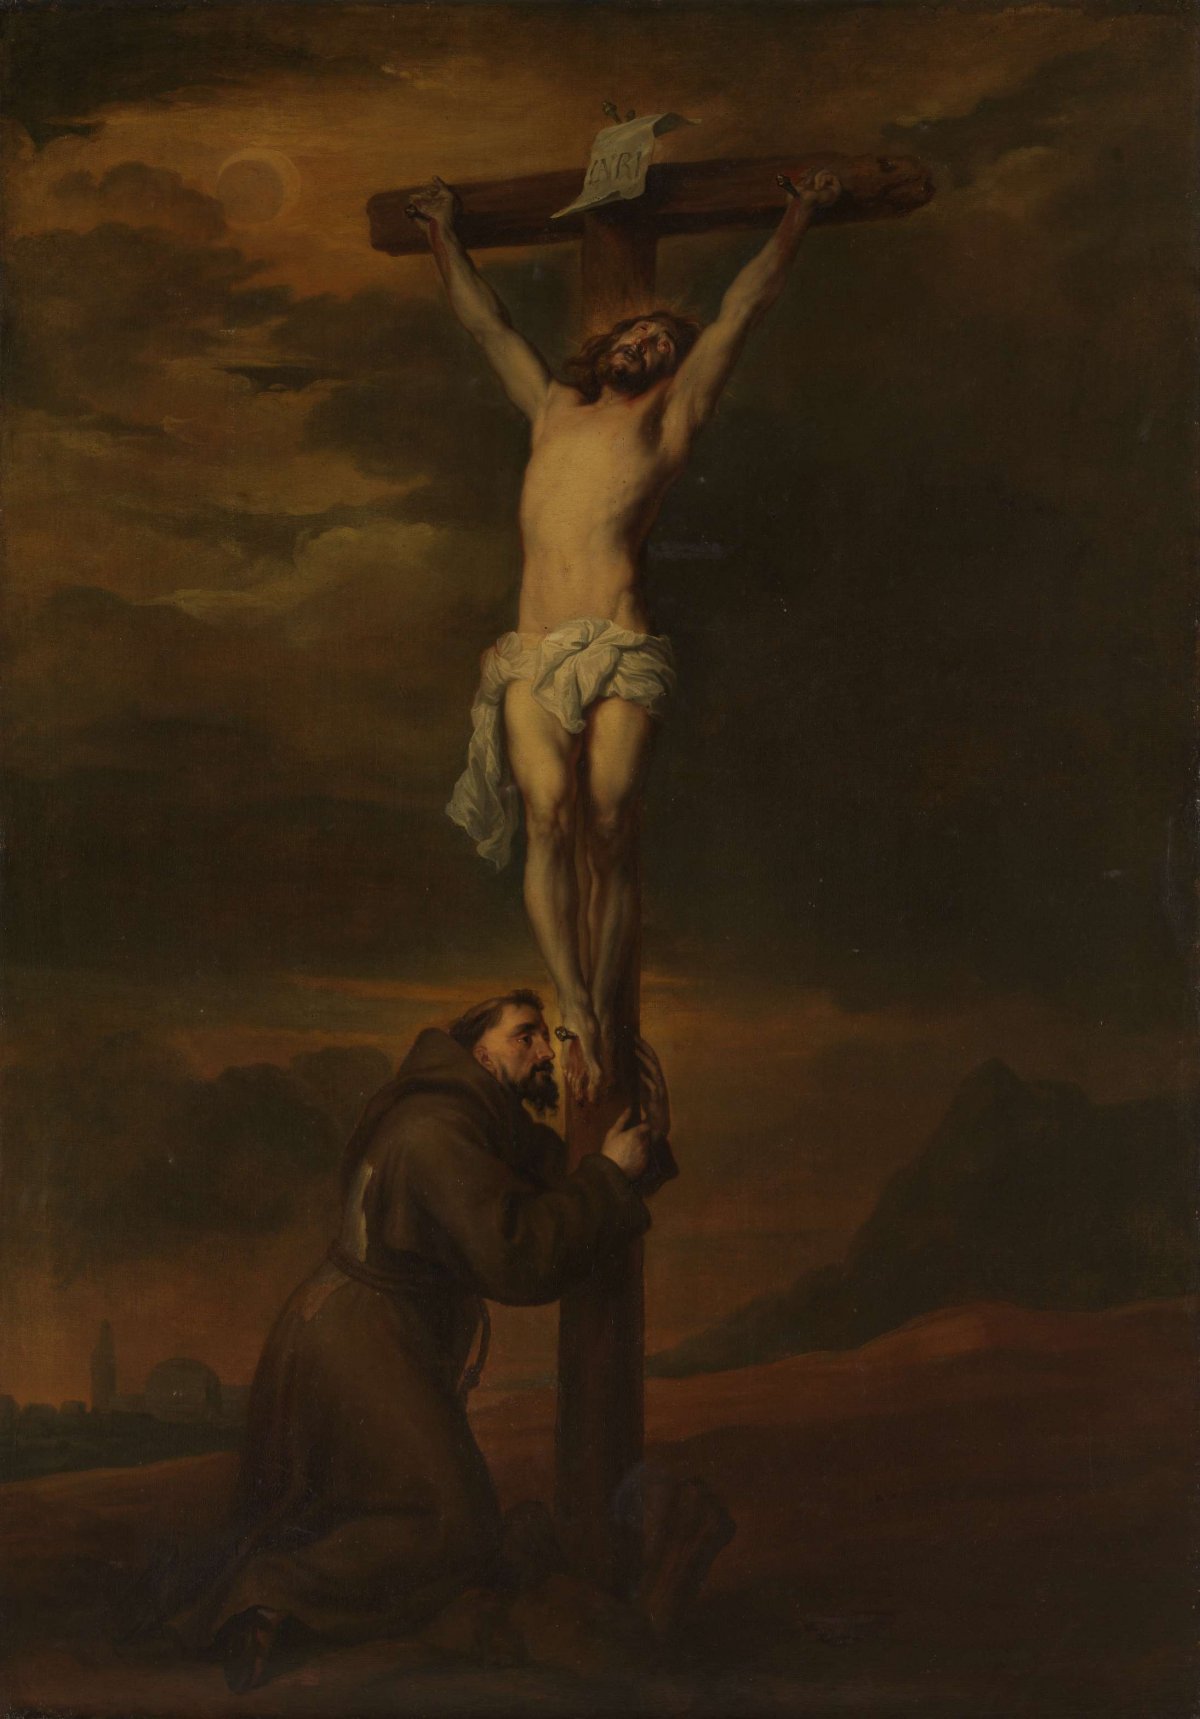 St Francis Lamenting at the Foot of the Cross, Anthony van Dyck, c. 1650 - c. 1670